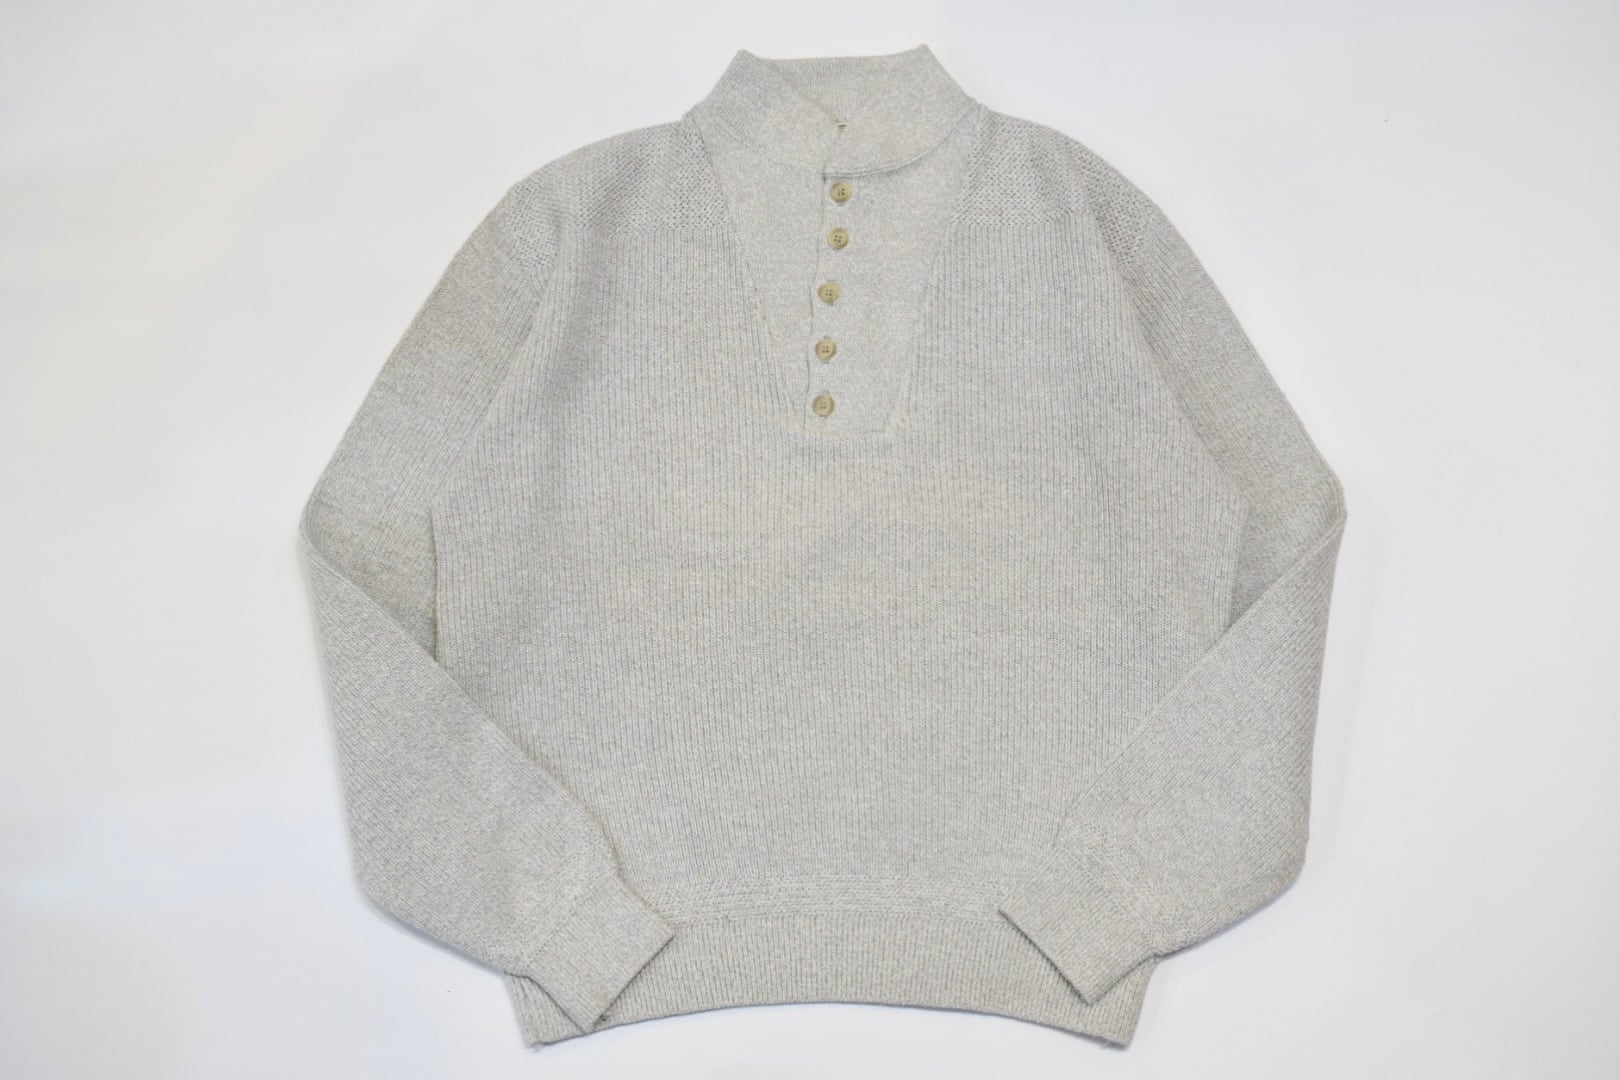 USED 80s L.L.Bean Cotton sweater -Large 01258